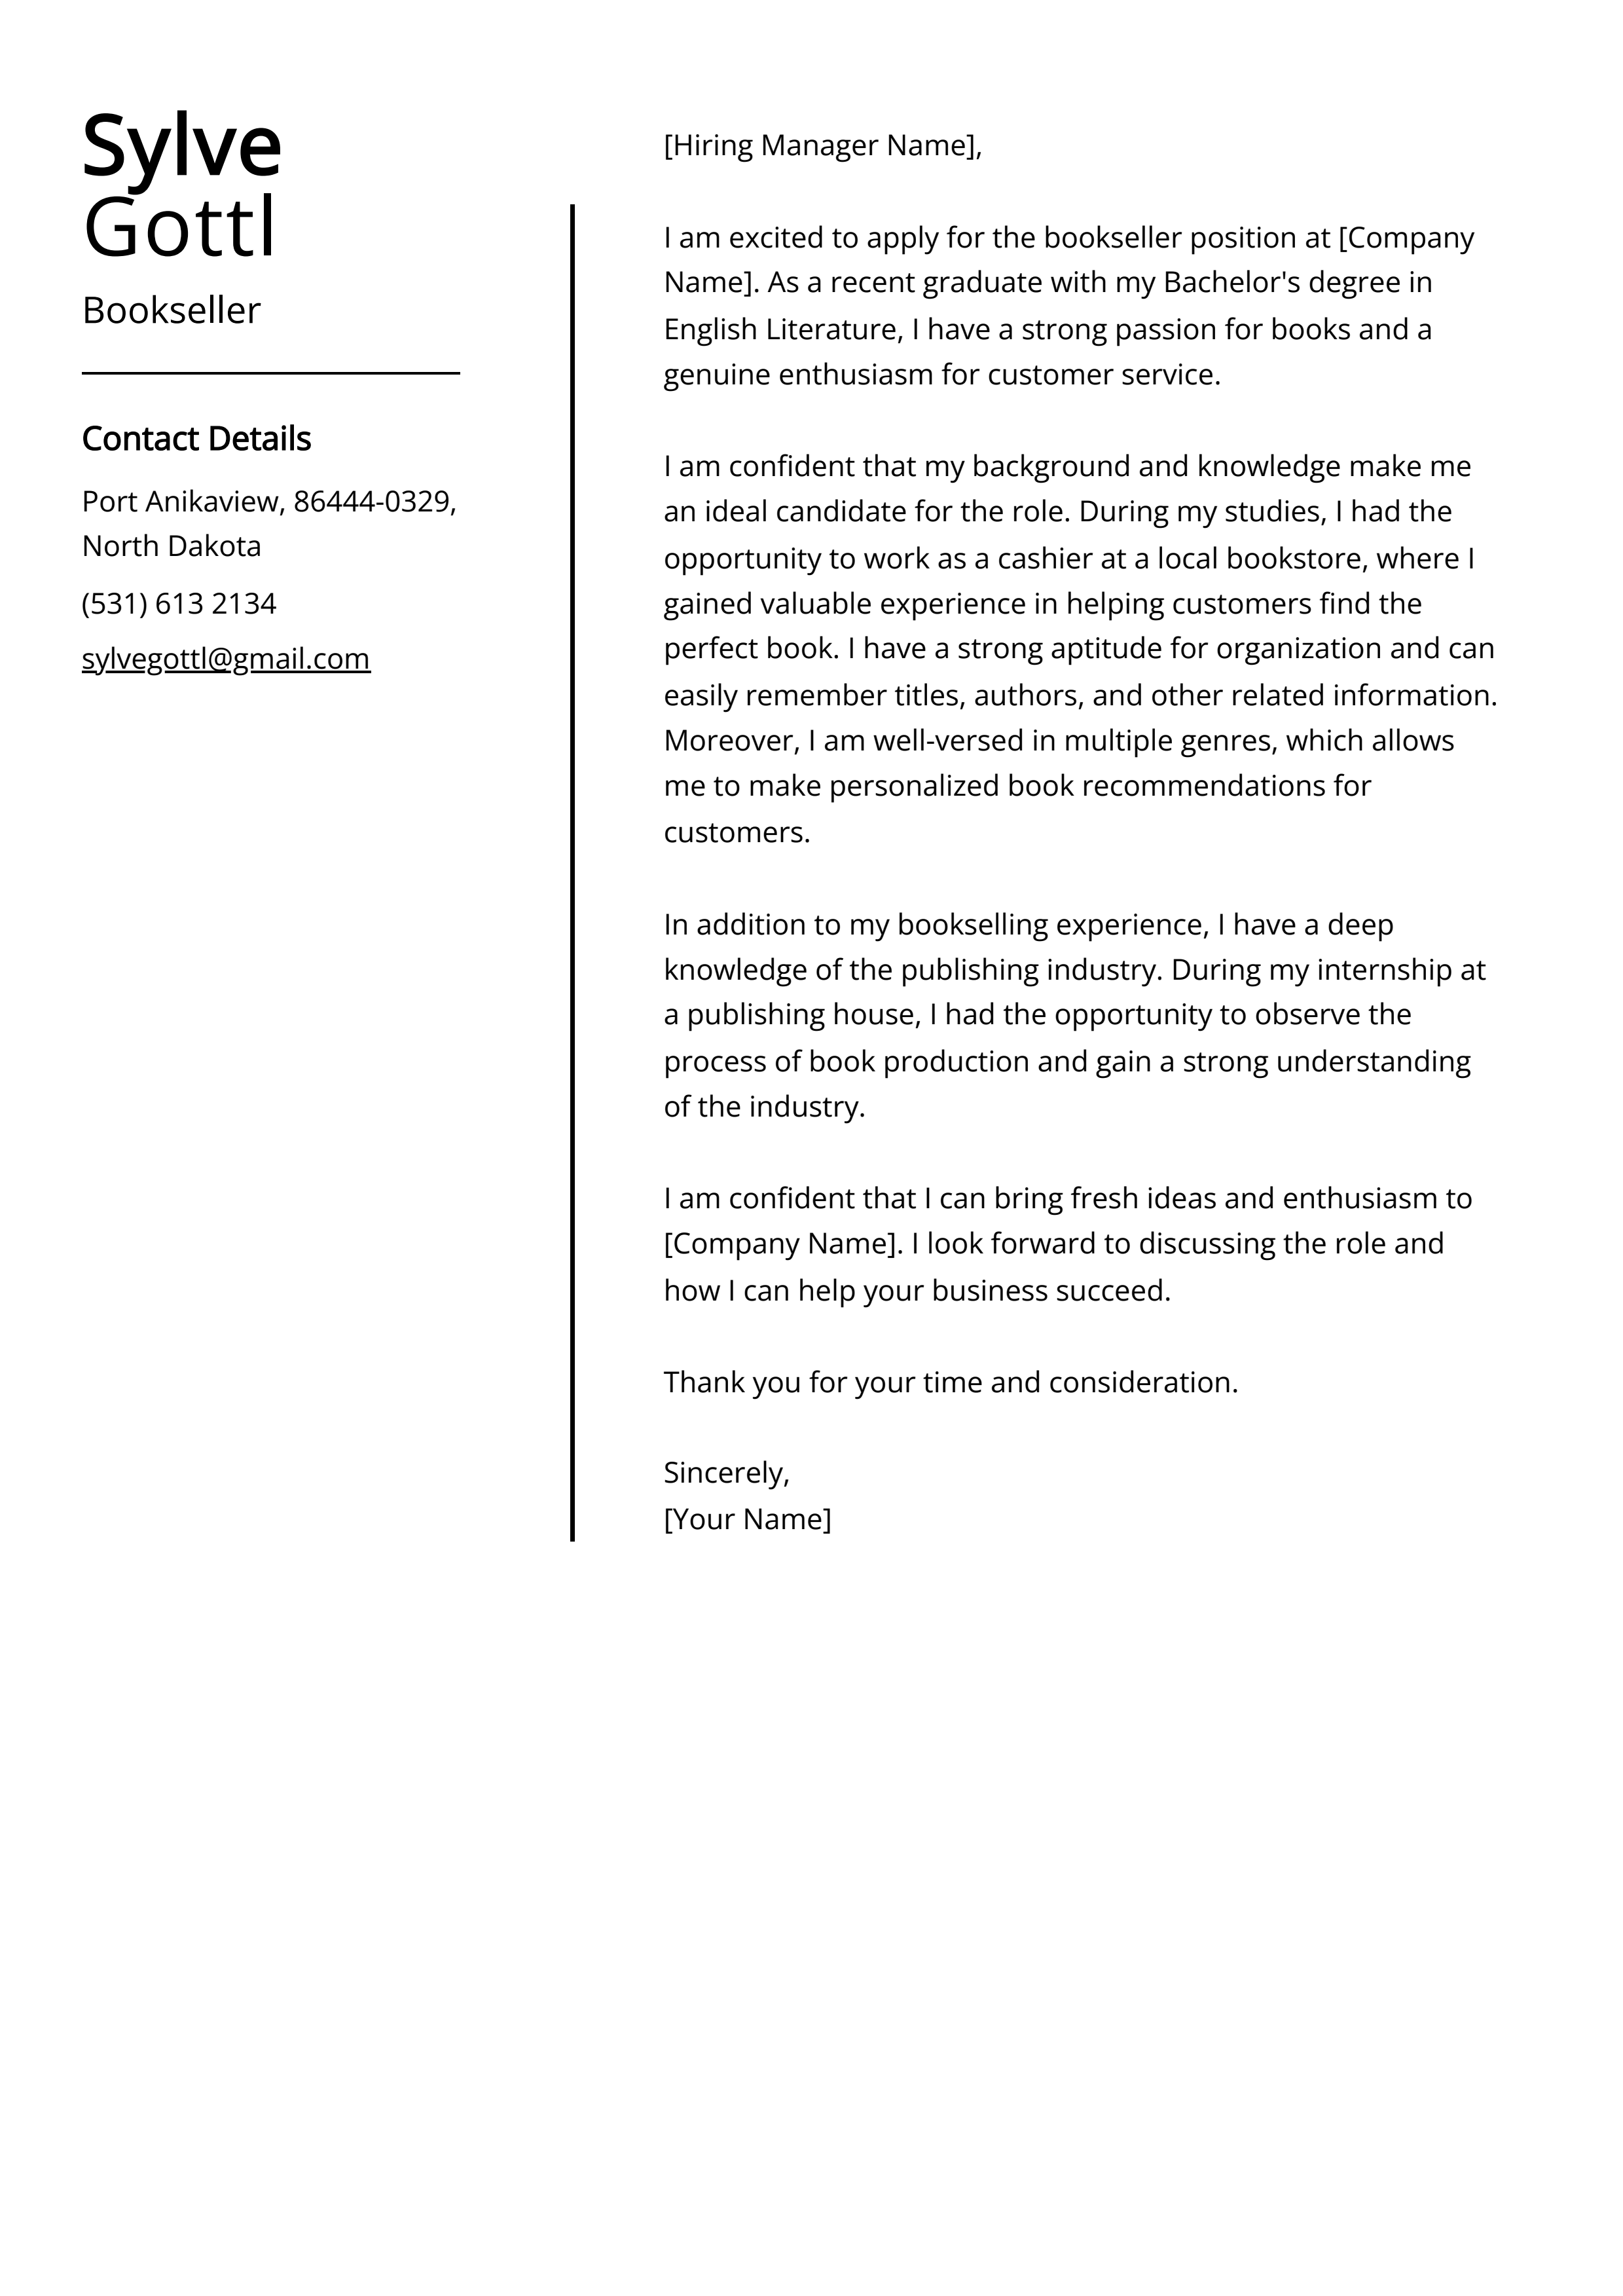 Bookseller Cover Letter Example